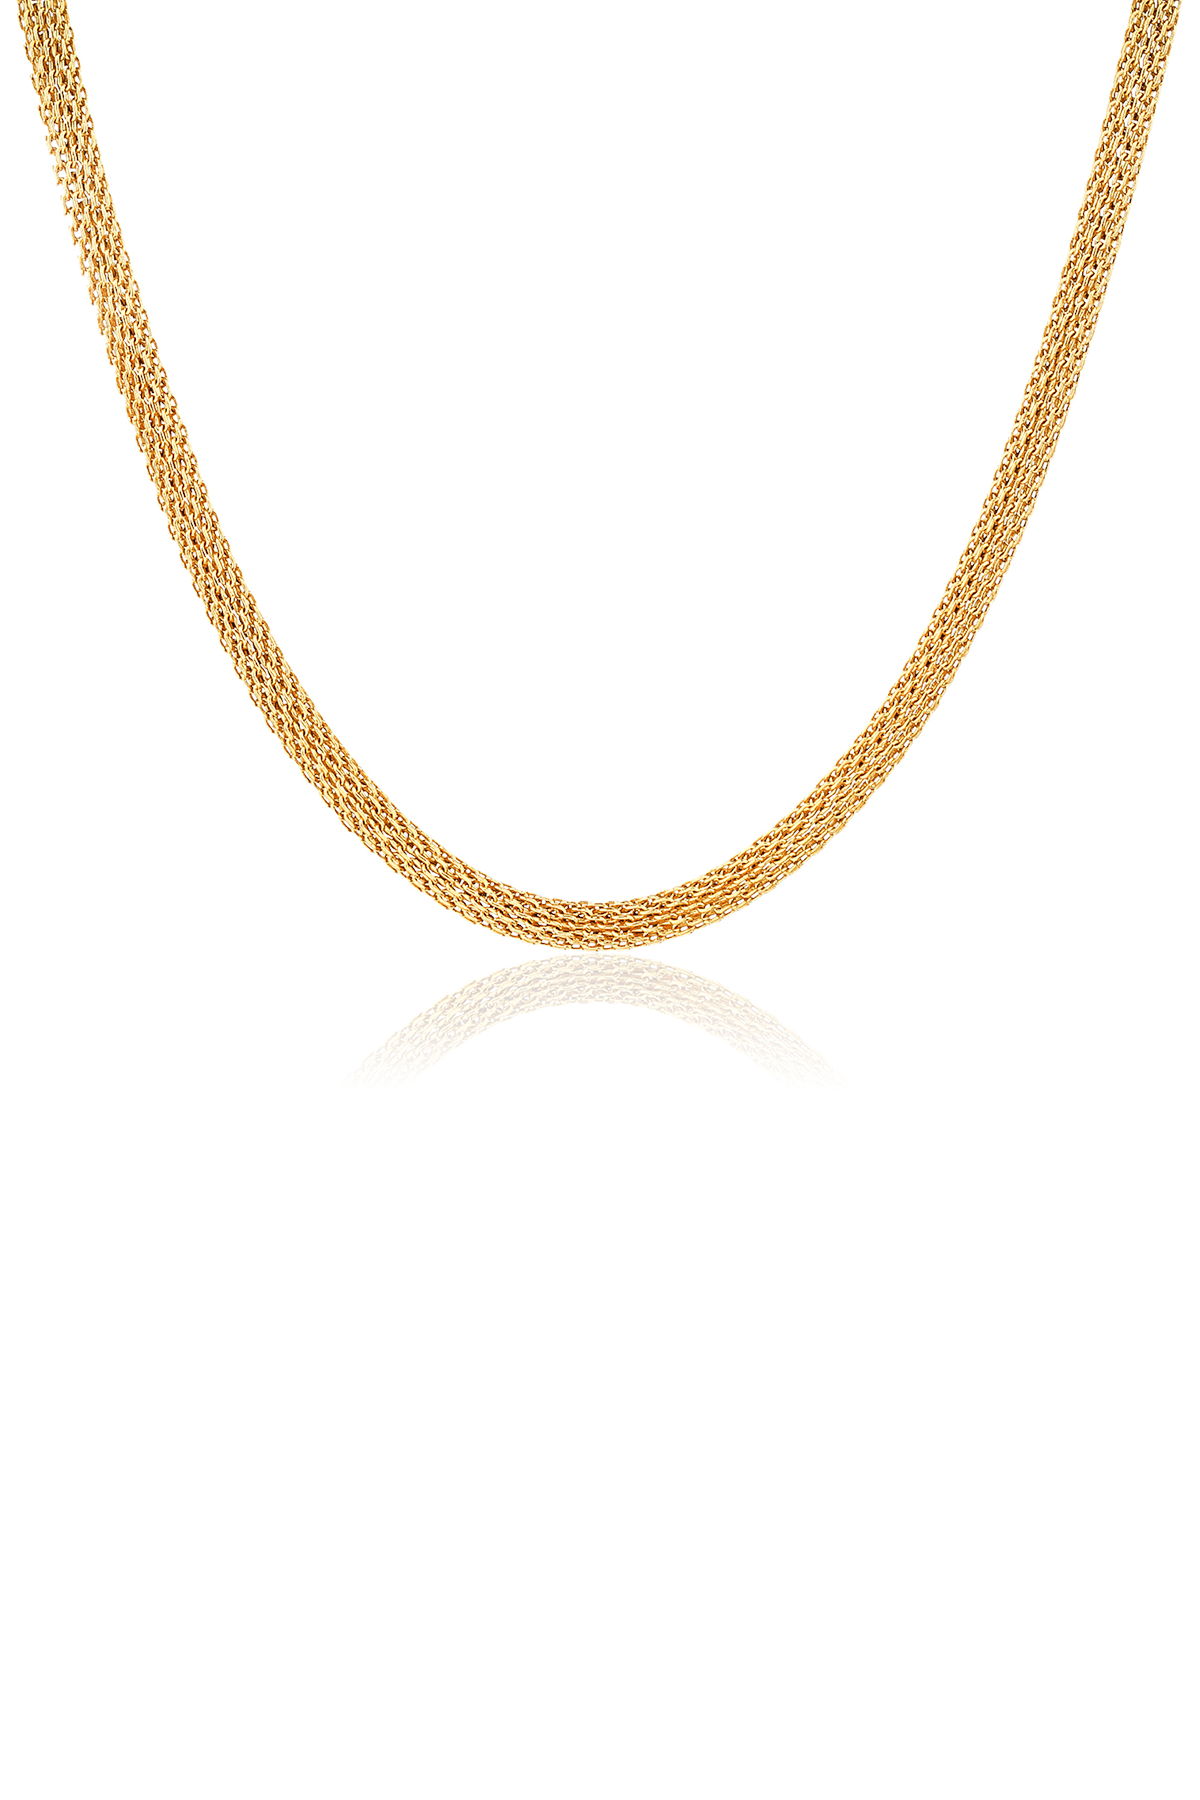 Cable necklace, gold - 5 mm